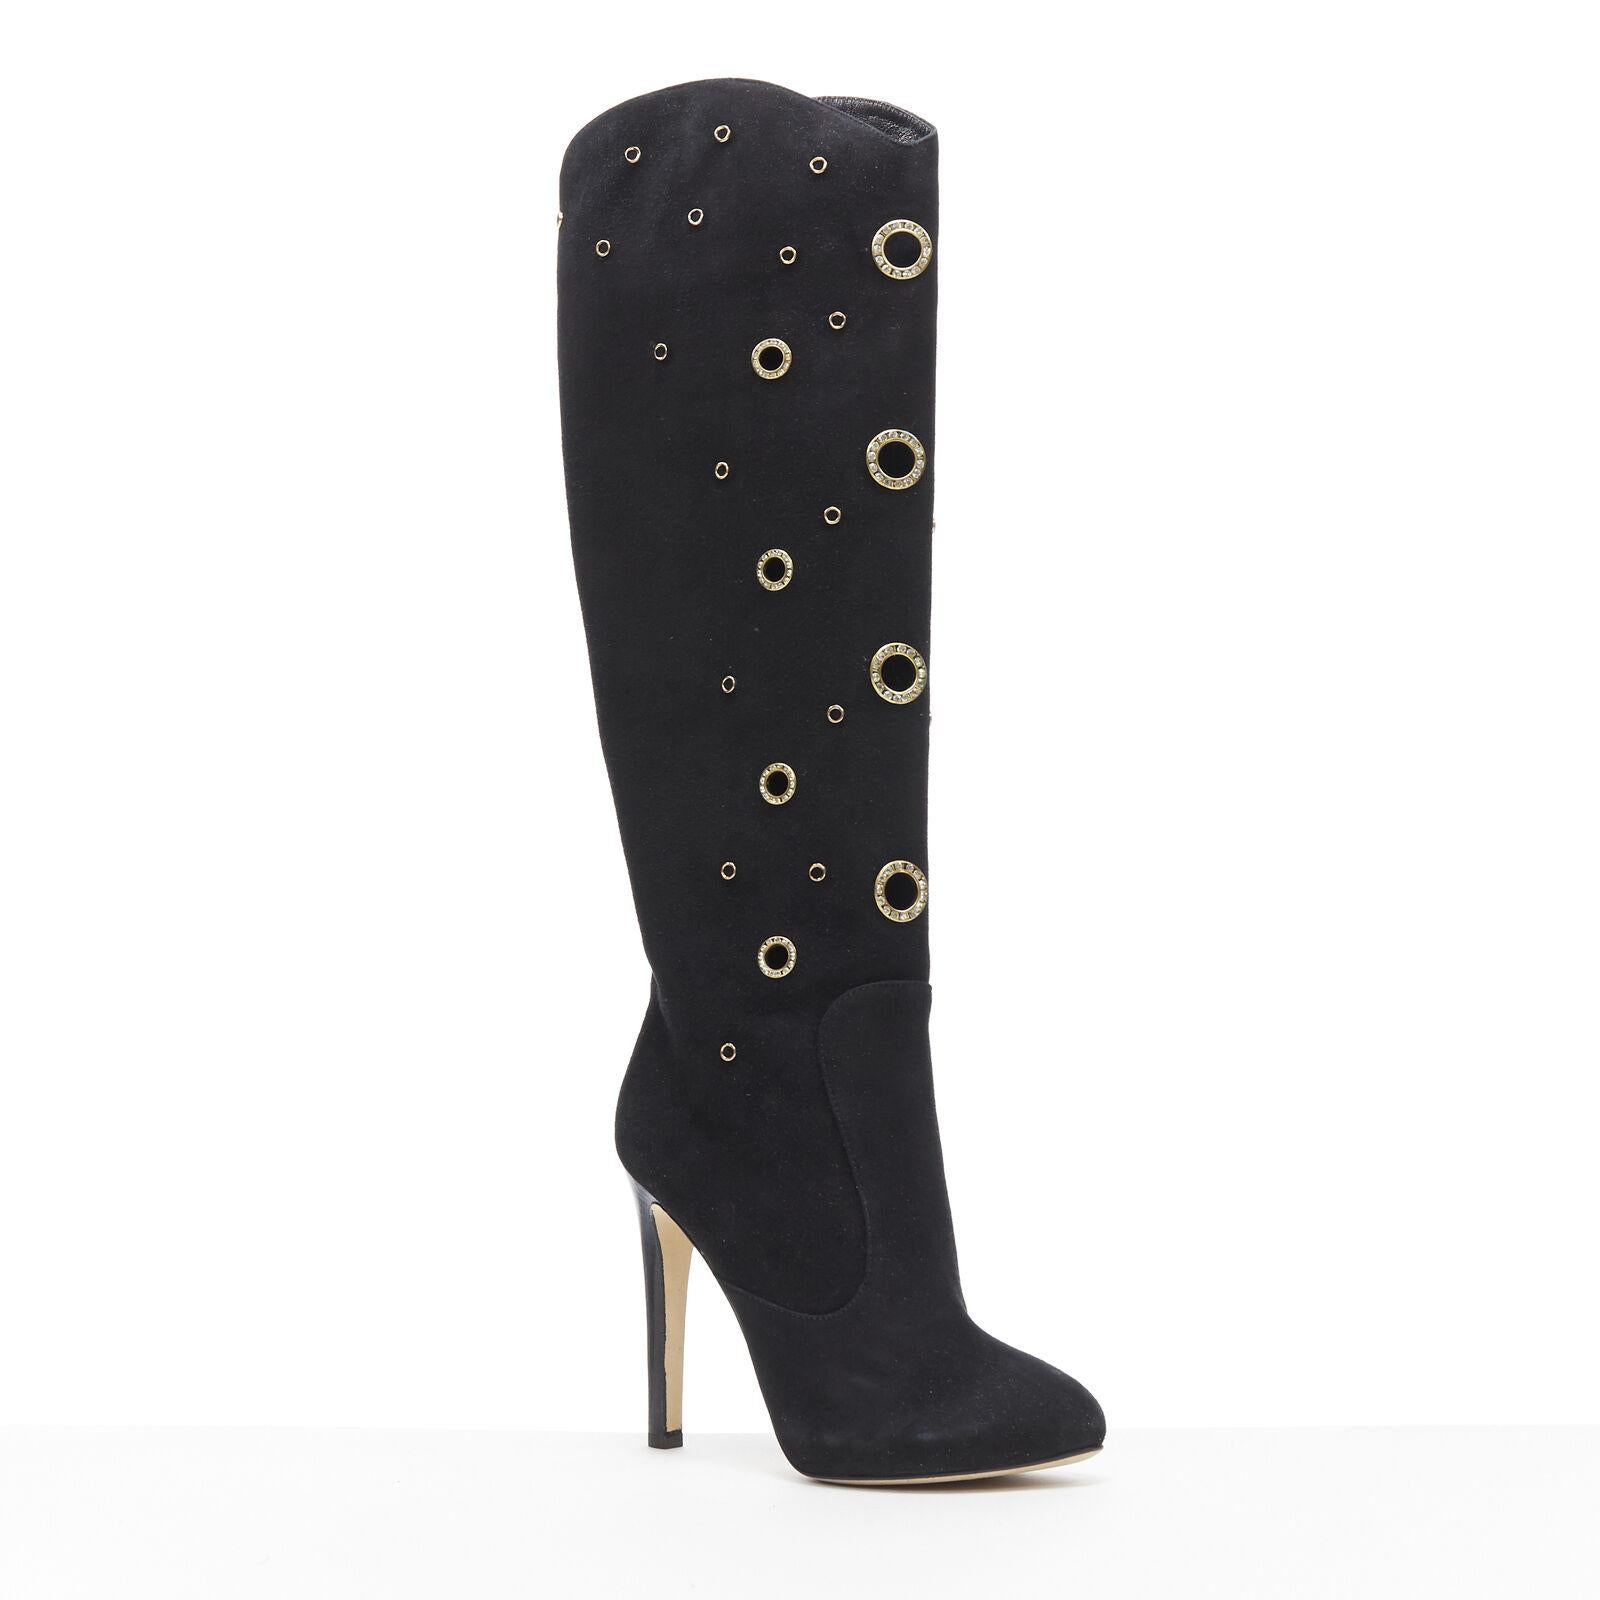 new GIUSEPPE ZANOTTI black suede gold crystal eyelet high heel tall boots EU37
Reference: TGAS/A05788
Brand: Giuseppe Zanotti
Model: Eyelet boots
Material: Suede
Color: Black
Pattern: Solid
Closure: Zip
Extra Details: Black suede leather upper.